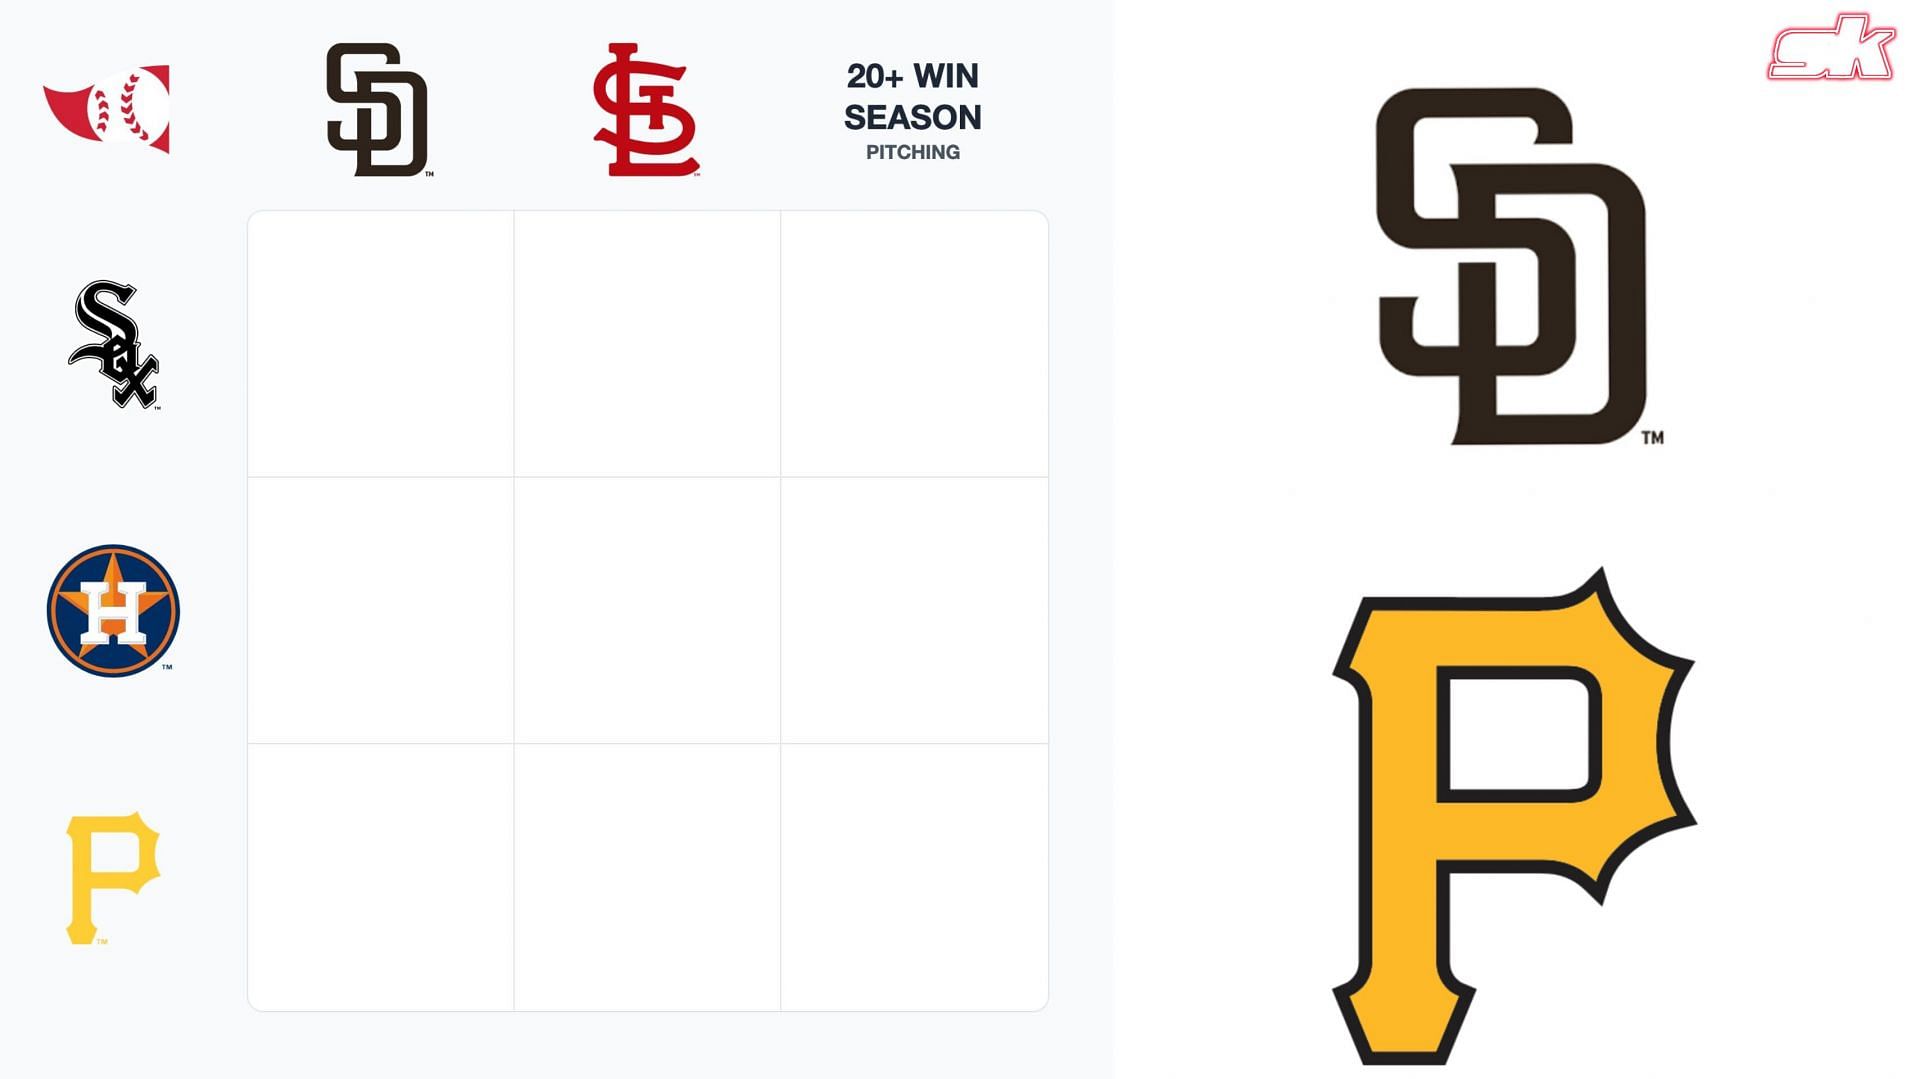 MLB Immaculate Grid August 16 answers the Pirates players to have also played for the Padres